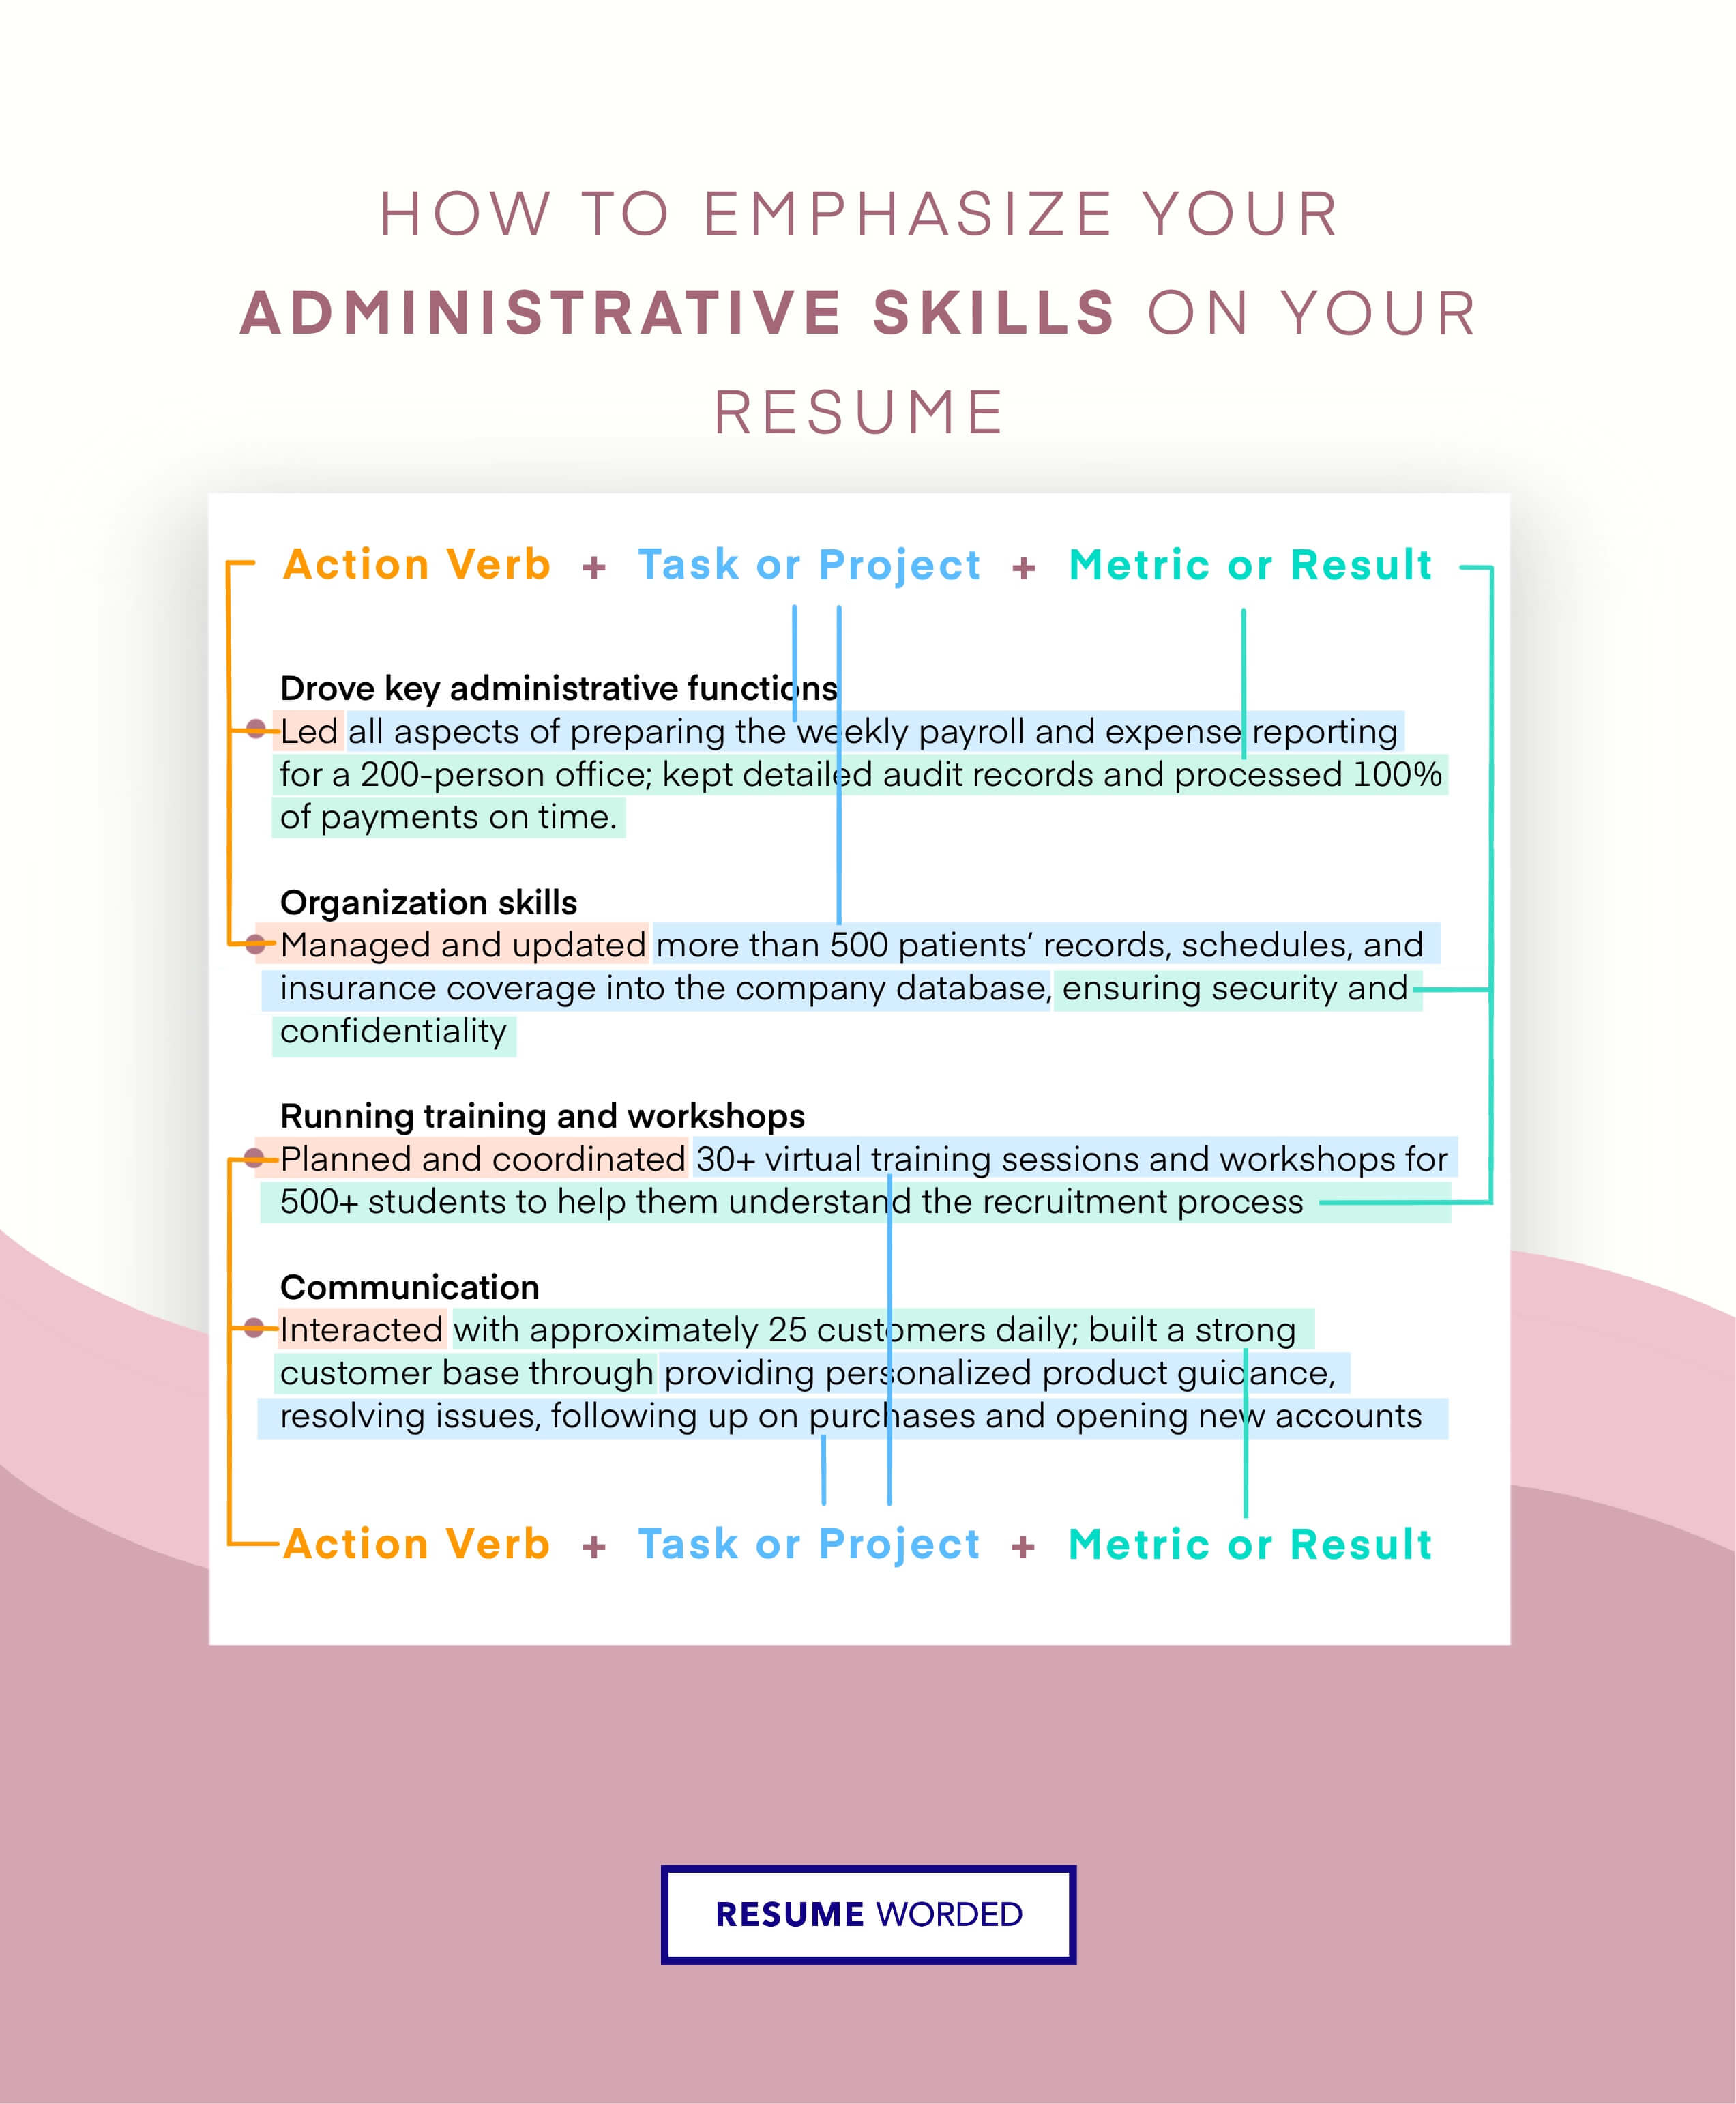 Show your holistic approach to administration - Director of Administration CV